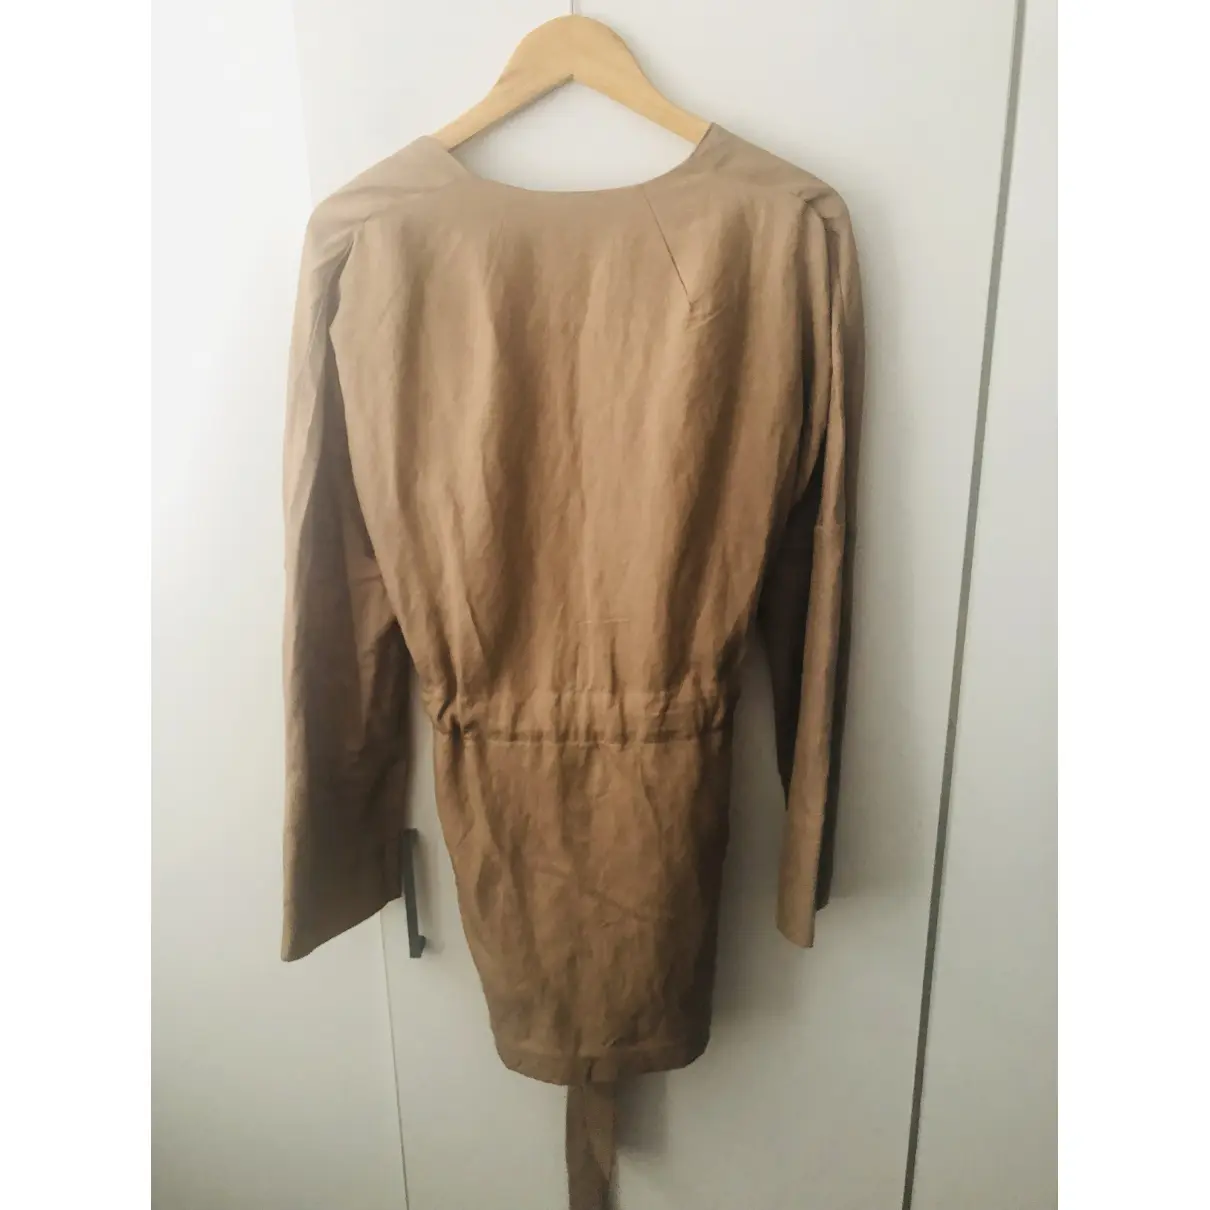 Buy French Connection Linen jacket online